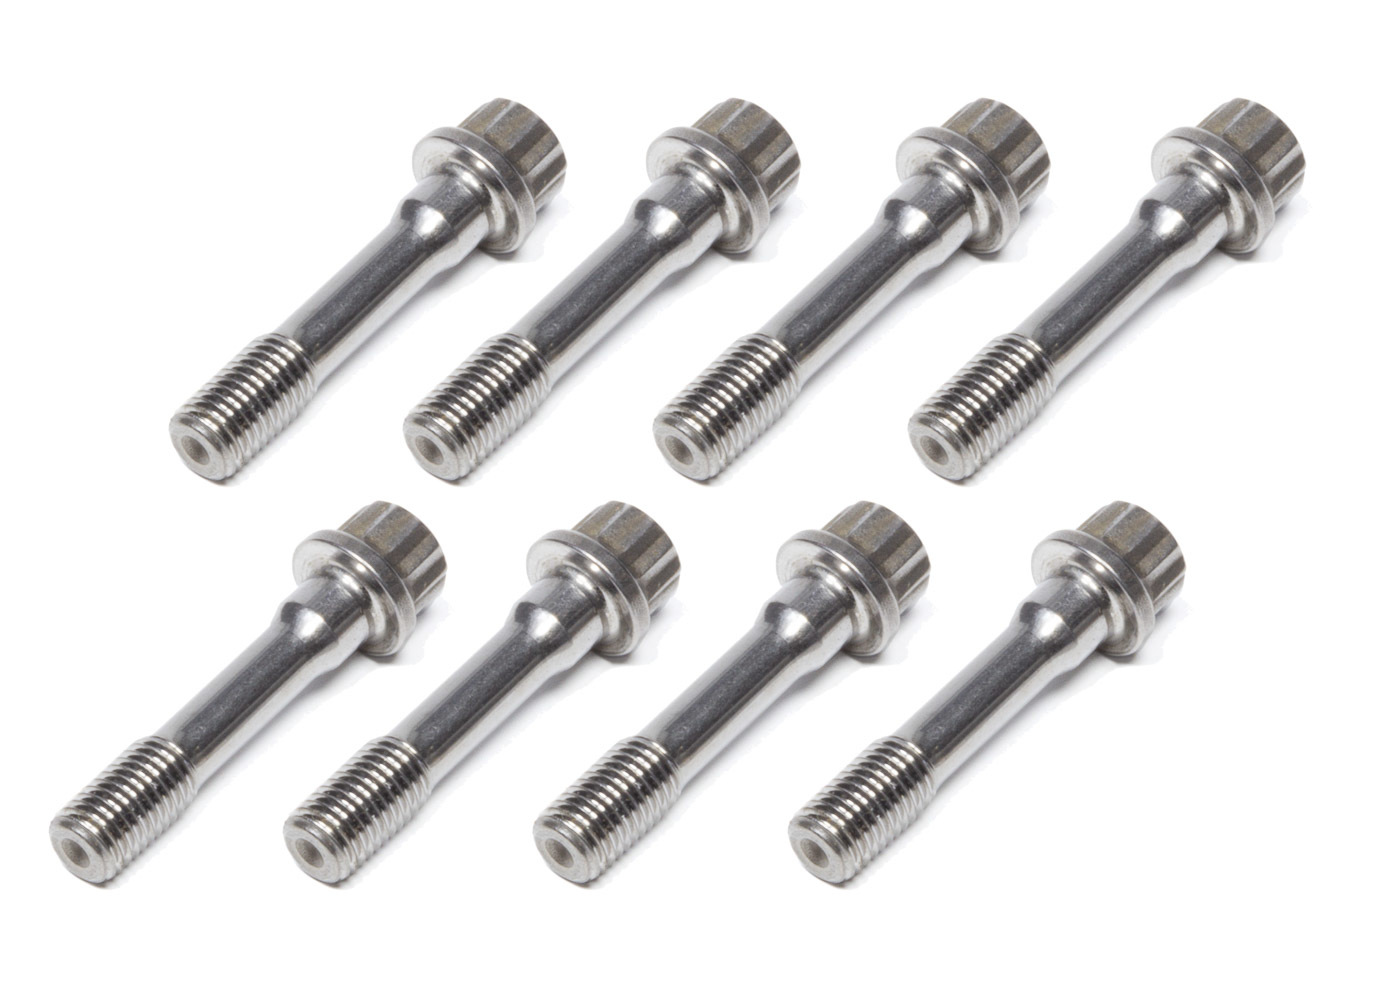 Eagle 20050 Connecting Rod Bolt Kit, 5/16 in Bolt, 1.500 in Long, 12 Point Head, ARP 2000, Set of 8